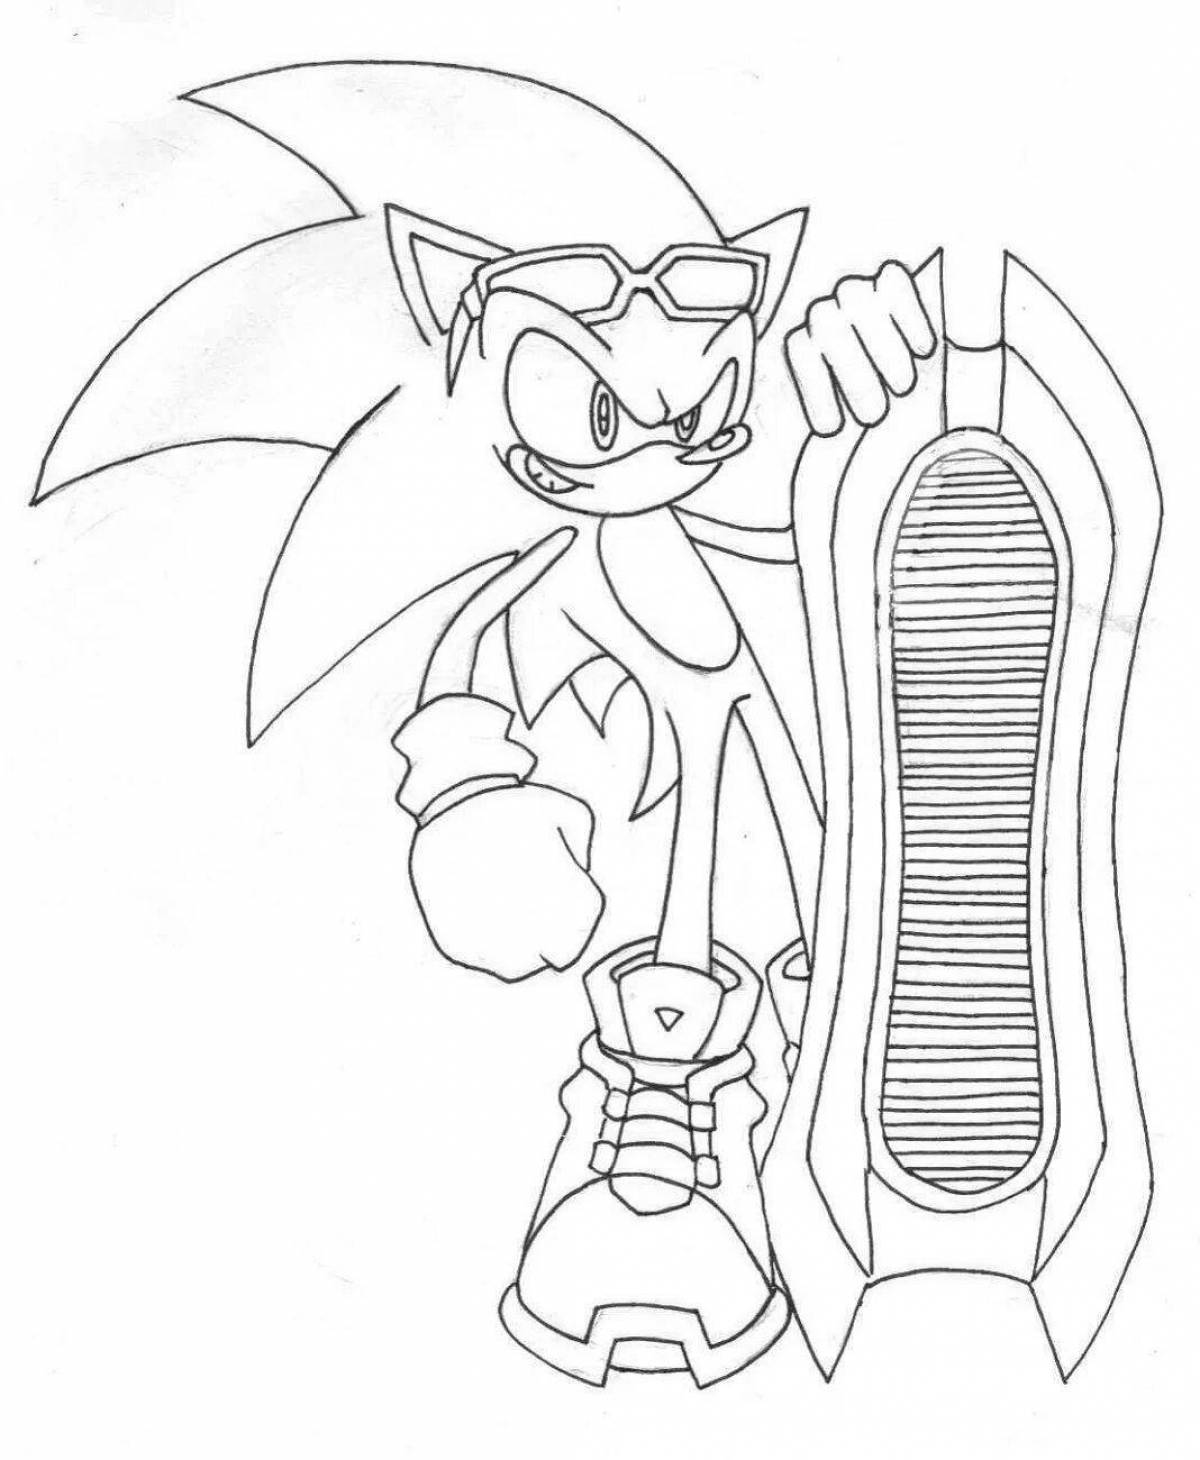 Excalibur sonic amazing coloring page